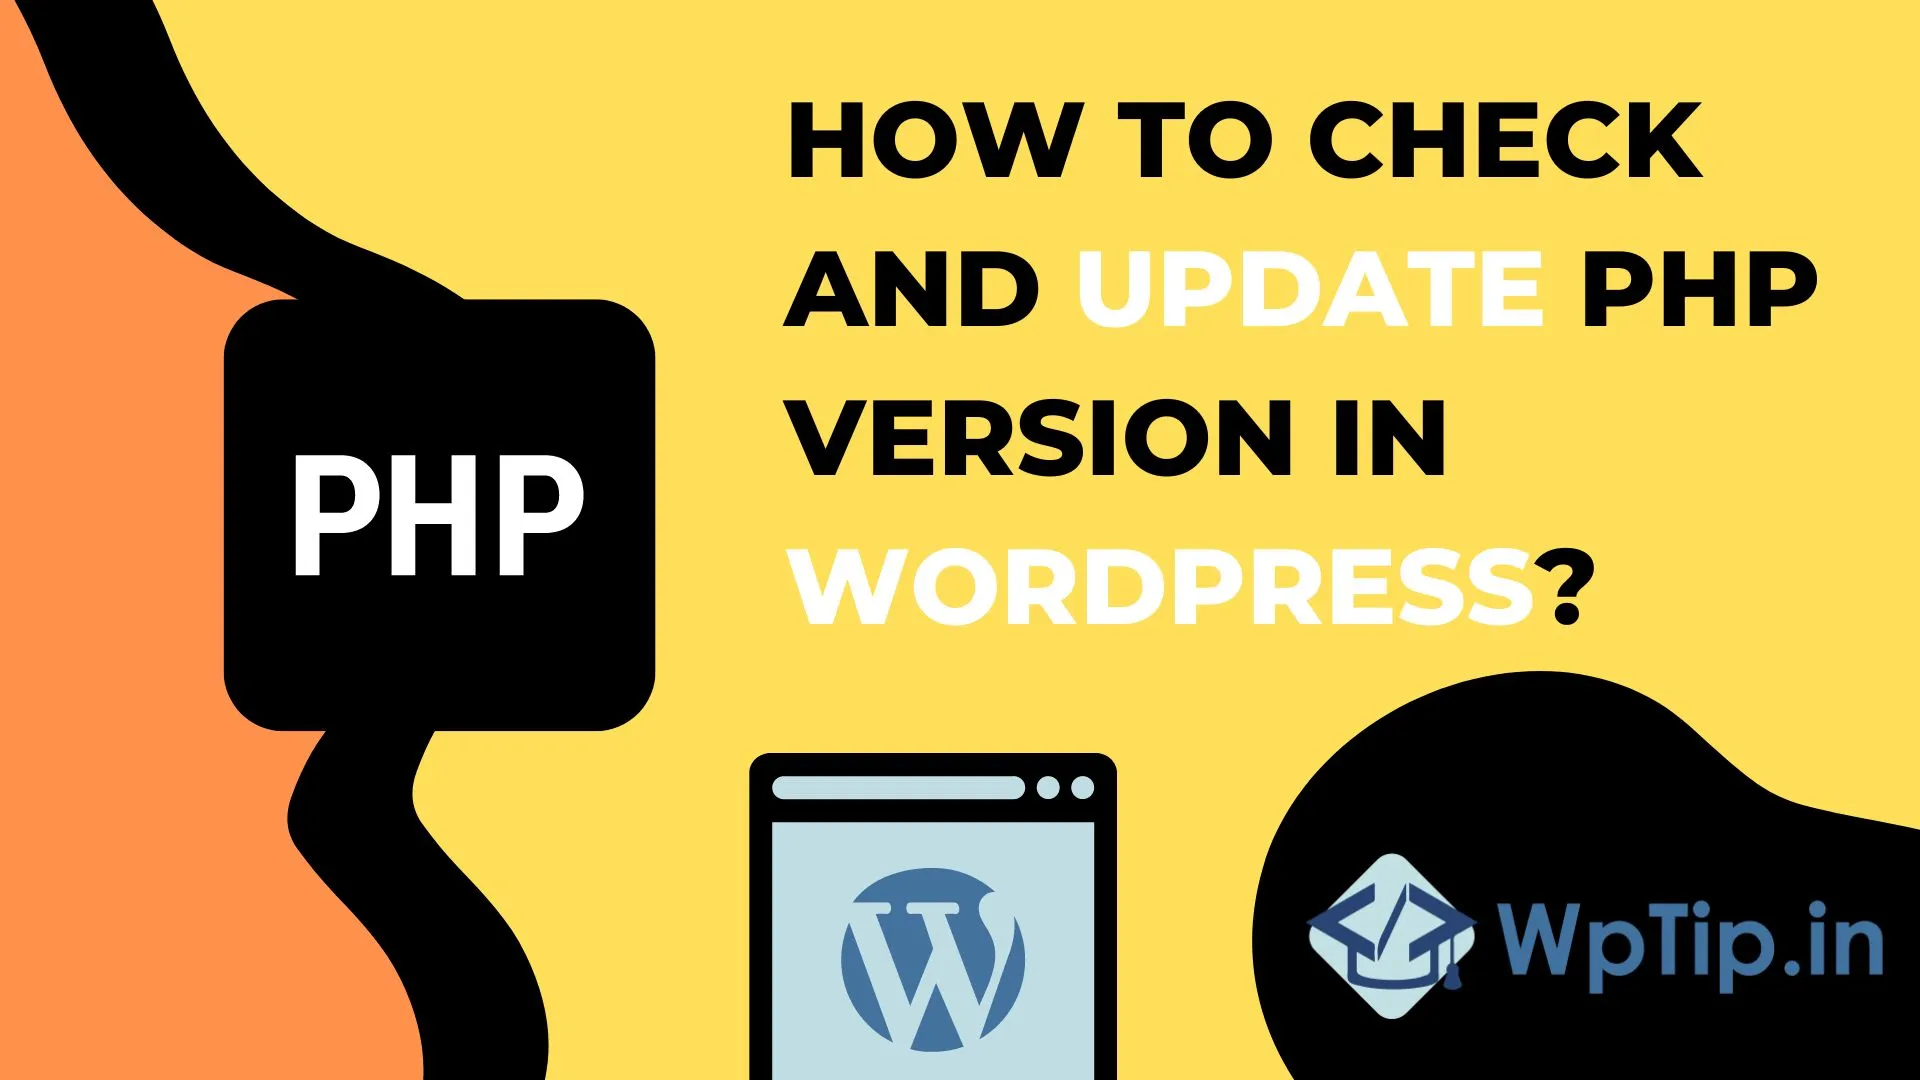 You are currently viewing How To Check and Update PHP Version in WordPress?